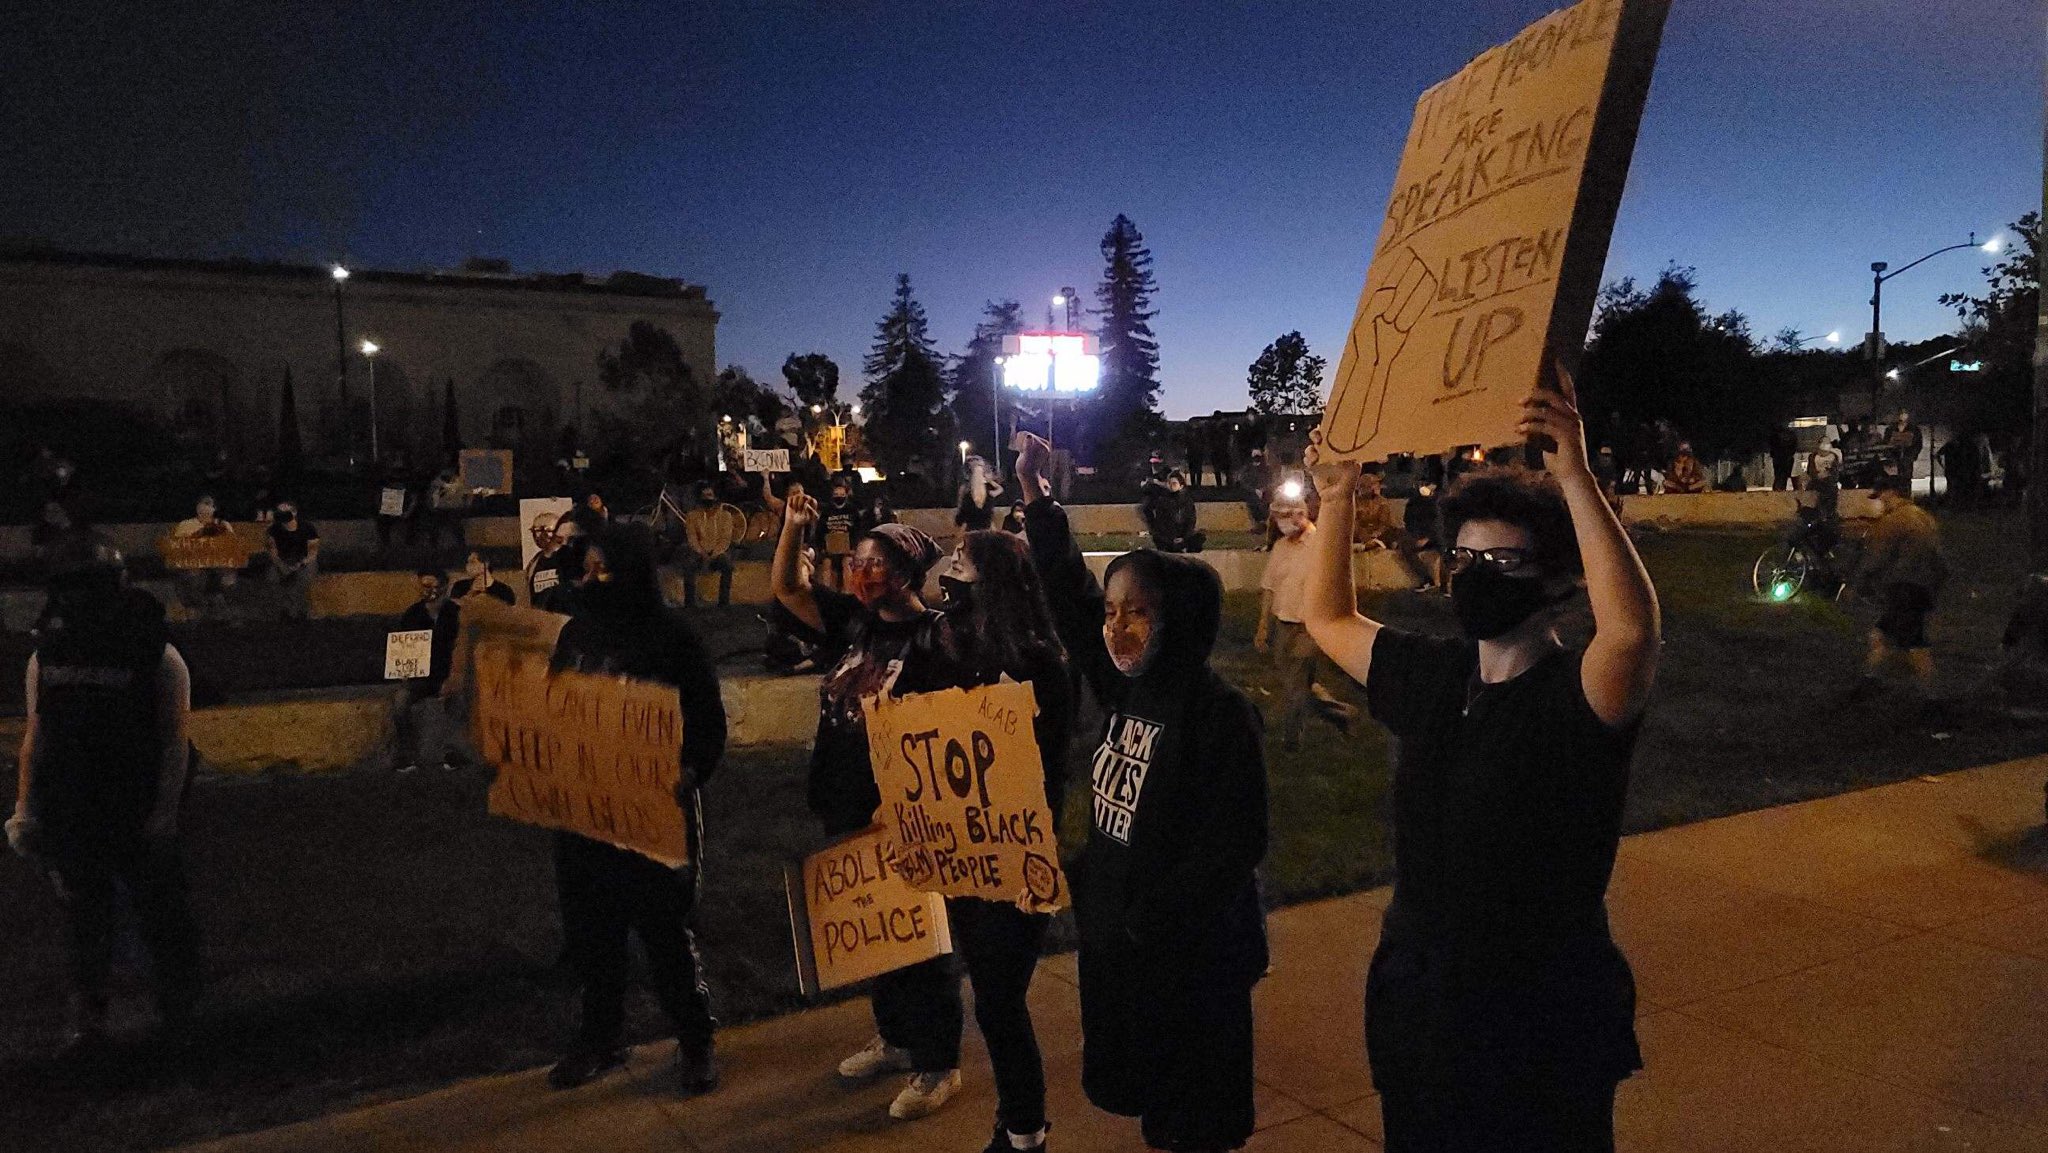 Protesters gather in Oakland following the grand jury's decision in the killing of Breonna Taylor, September 23, 2020. (Andrea Nakano / CBS)